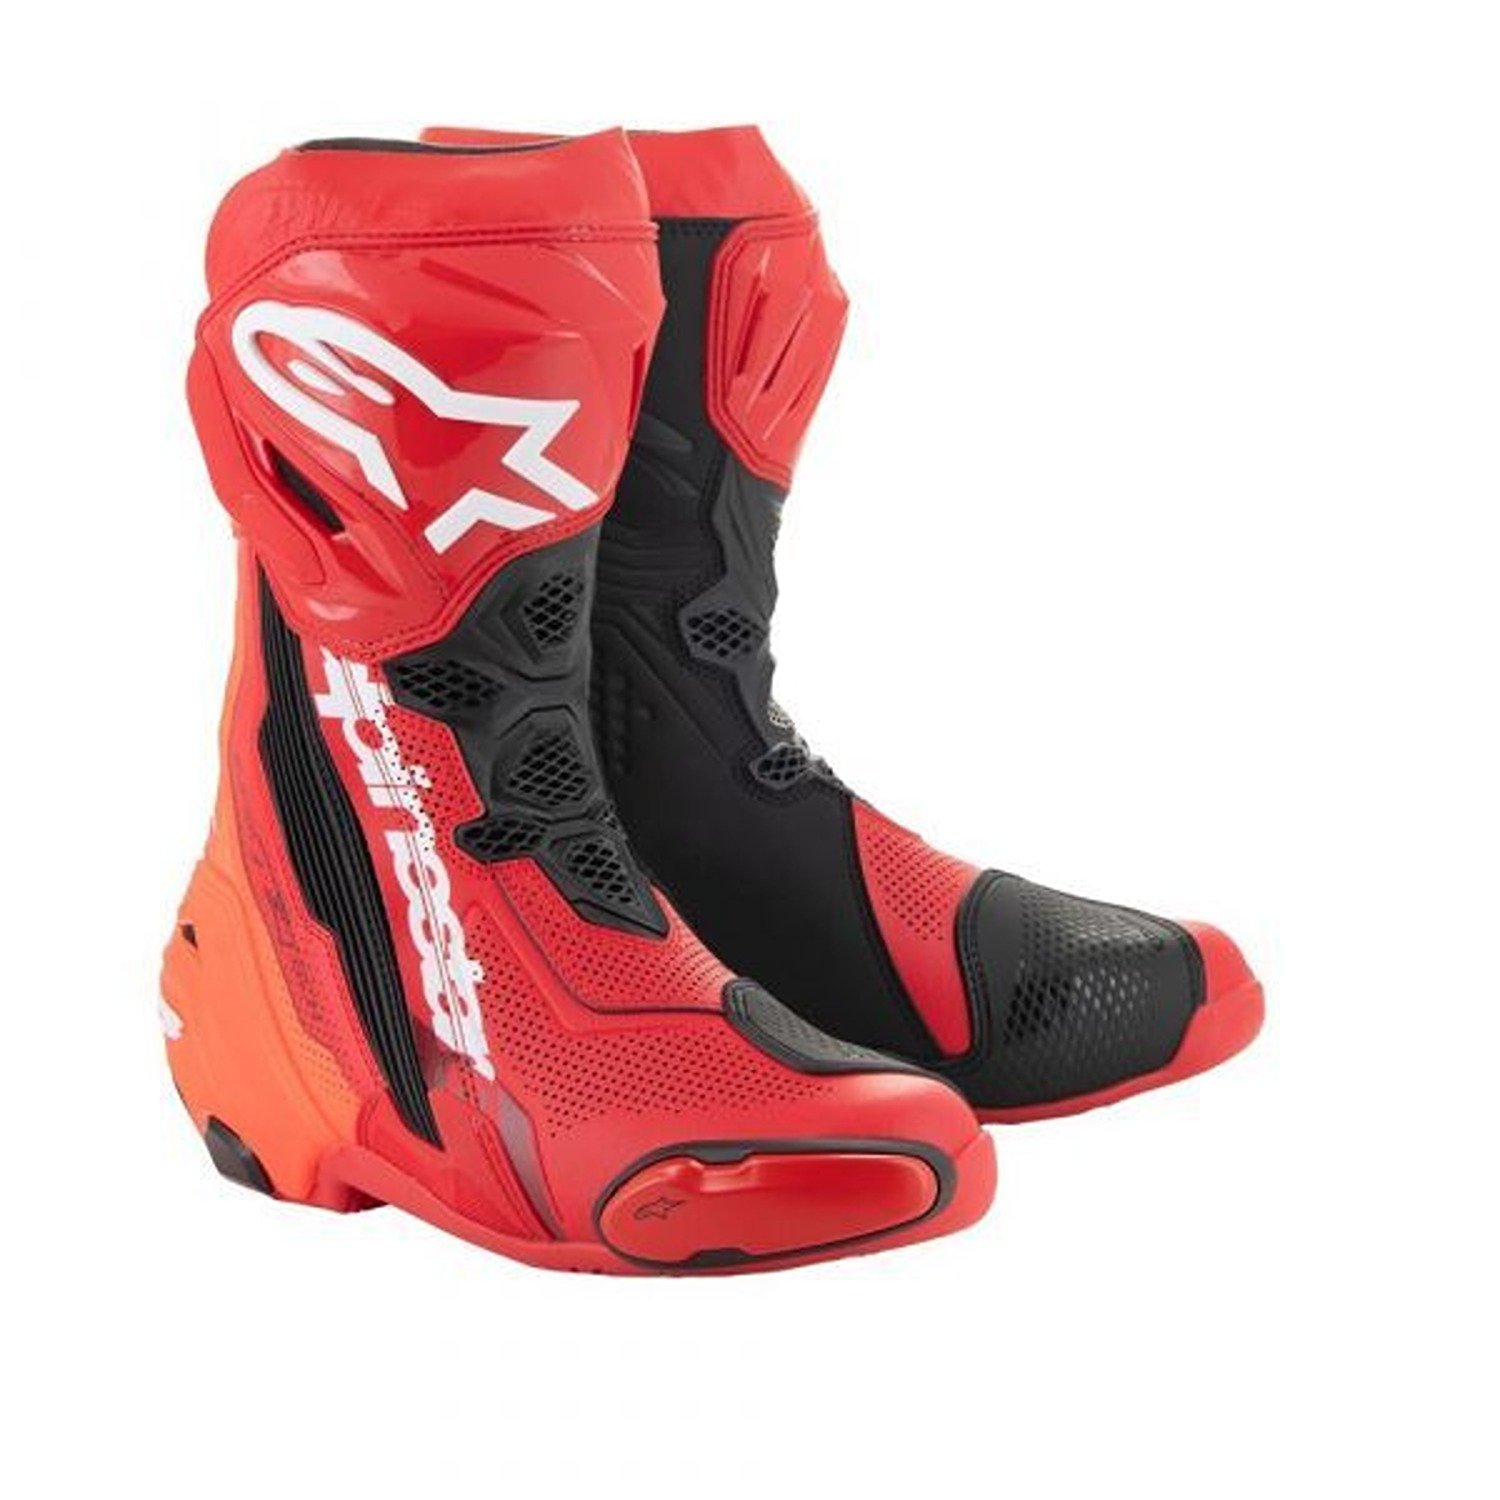 Image of Alpinestars Supertech R Vented Boots Bright Red Red Fluo Größe 45